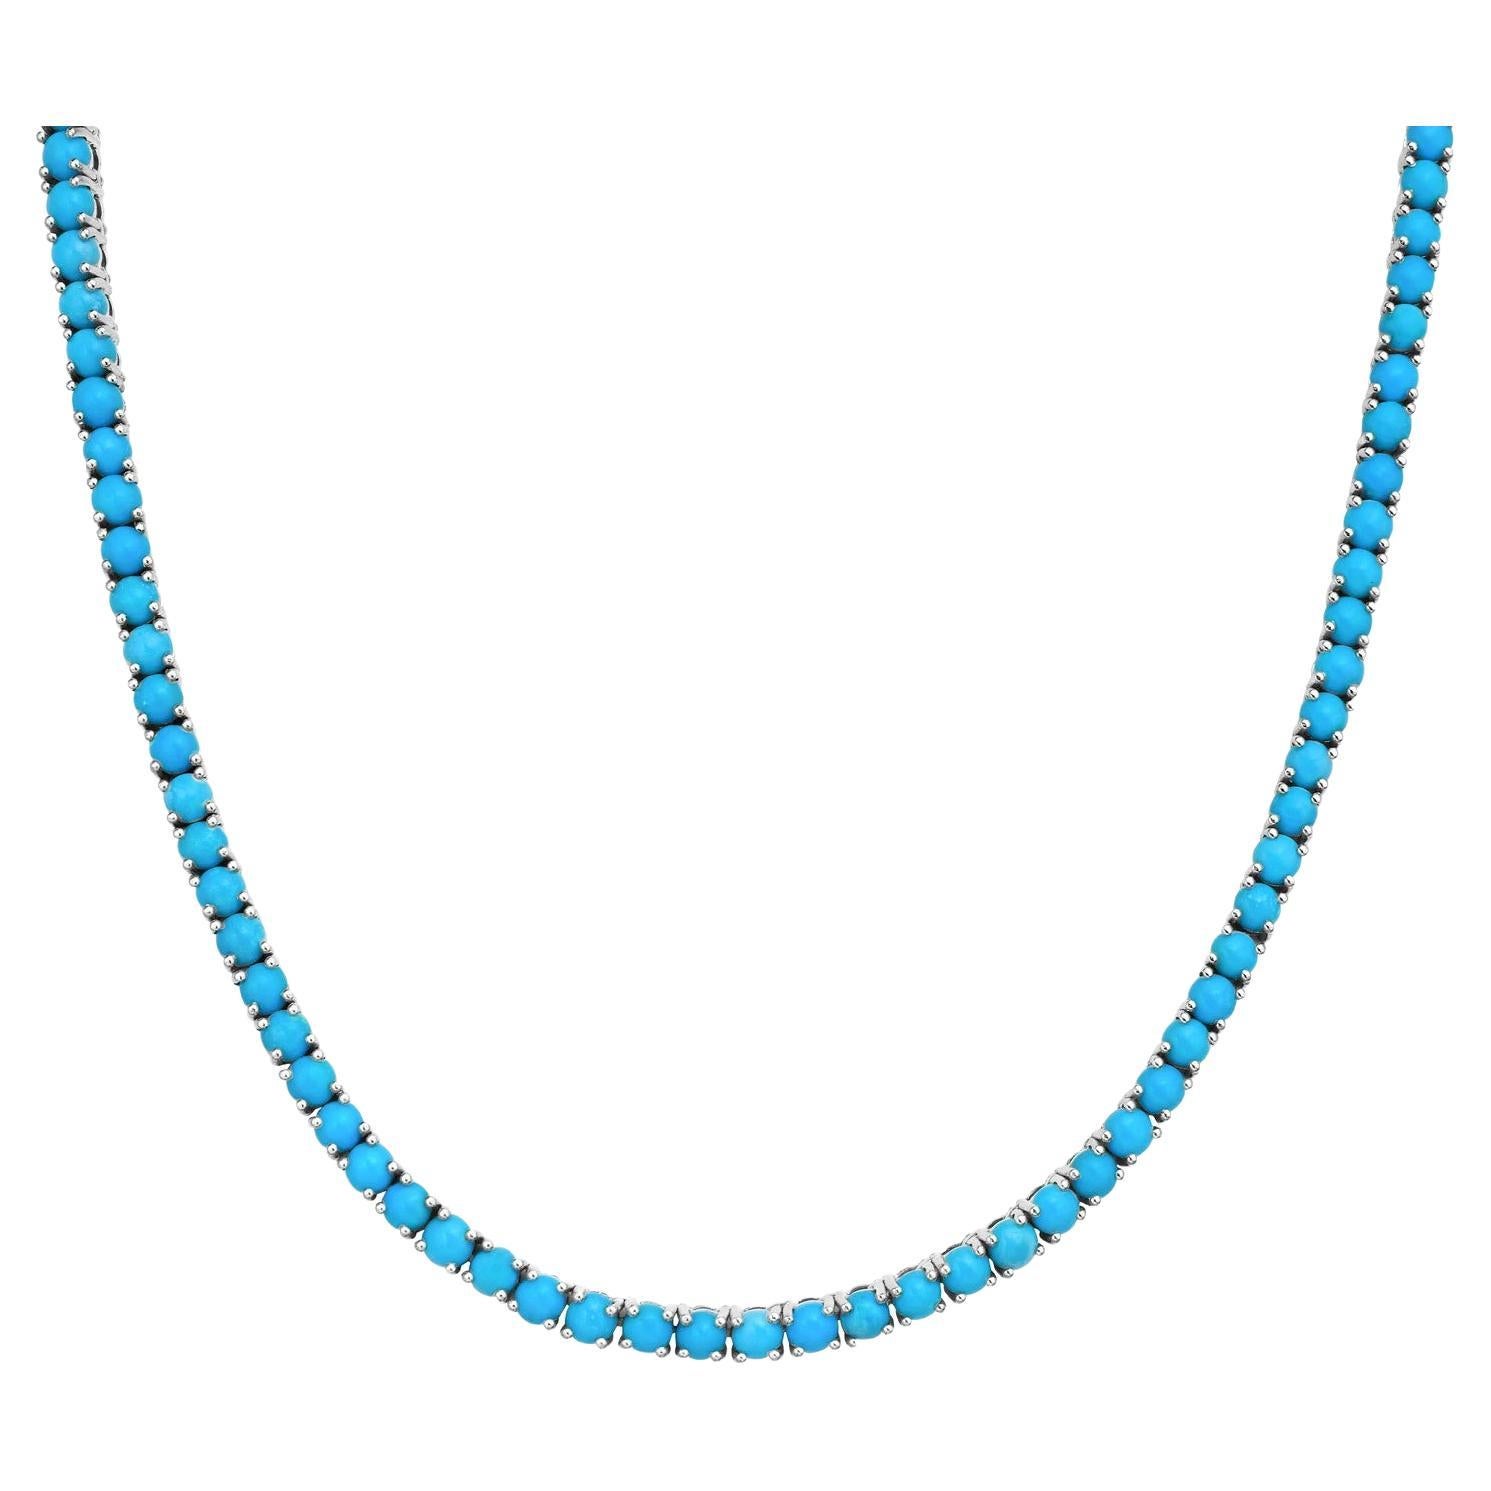 Turquoise Necklace 16.64 Carats 14K White Gold For Sale